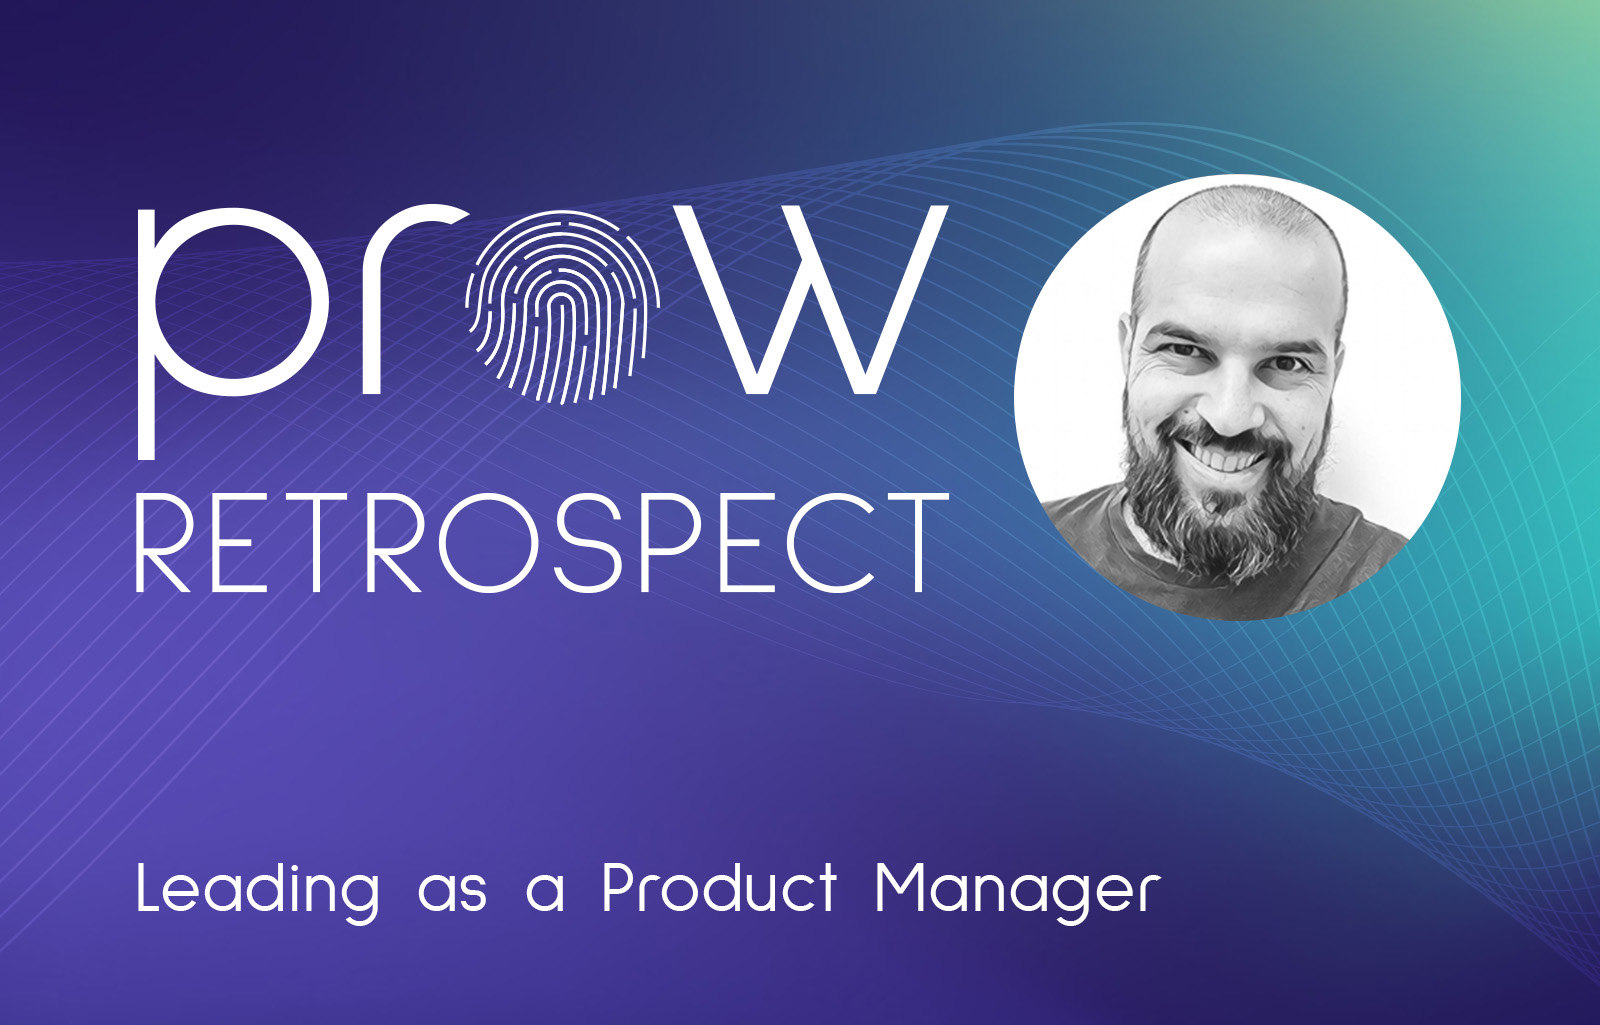 Prow in Retrospect: Alexandru Bleau on Leading as a Product Manager